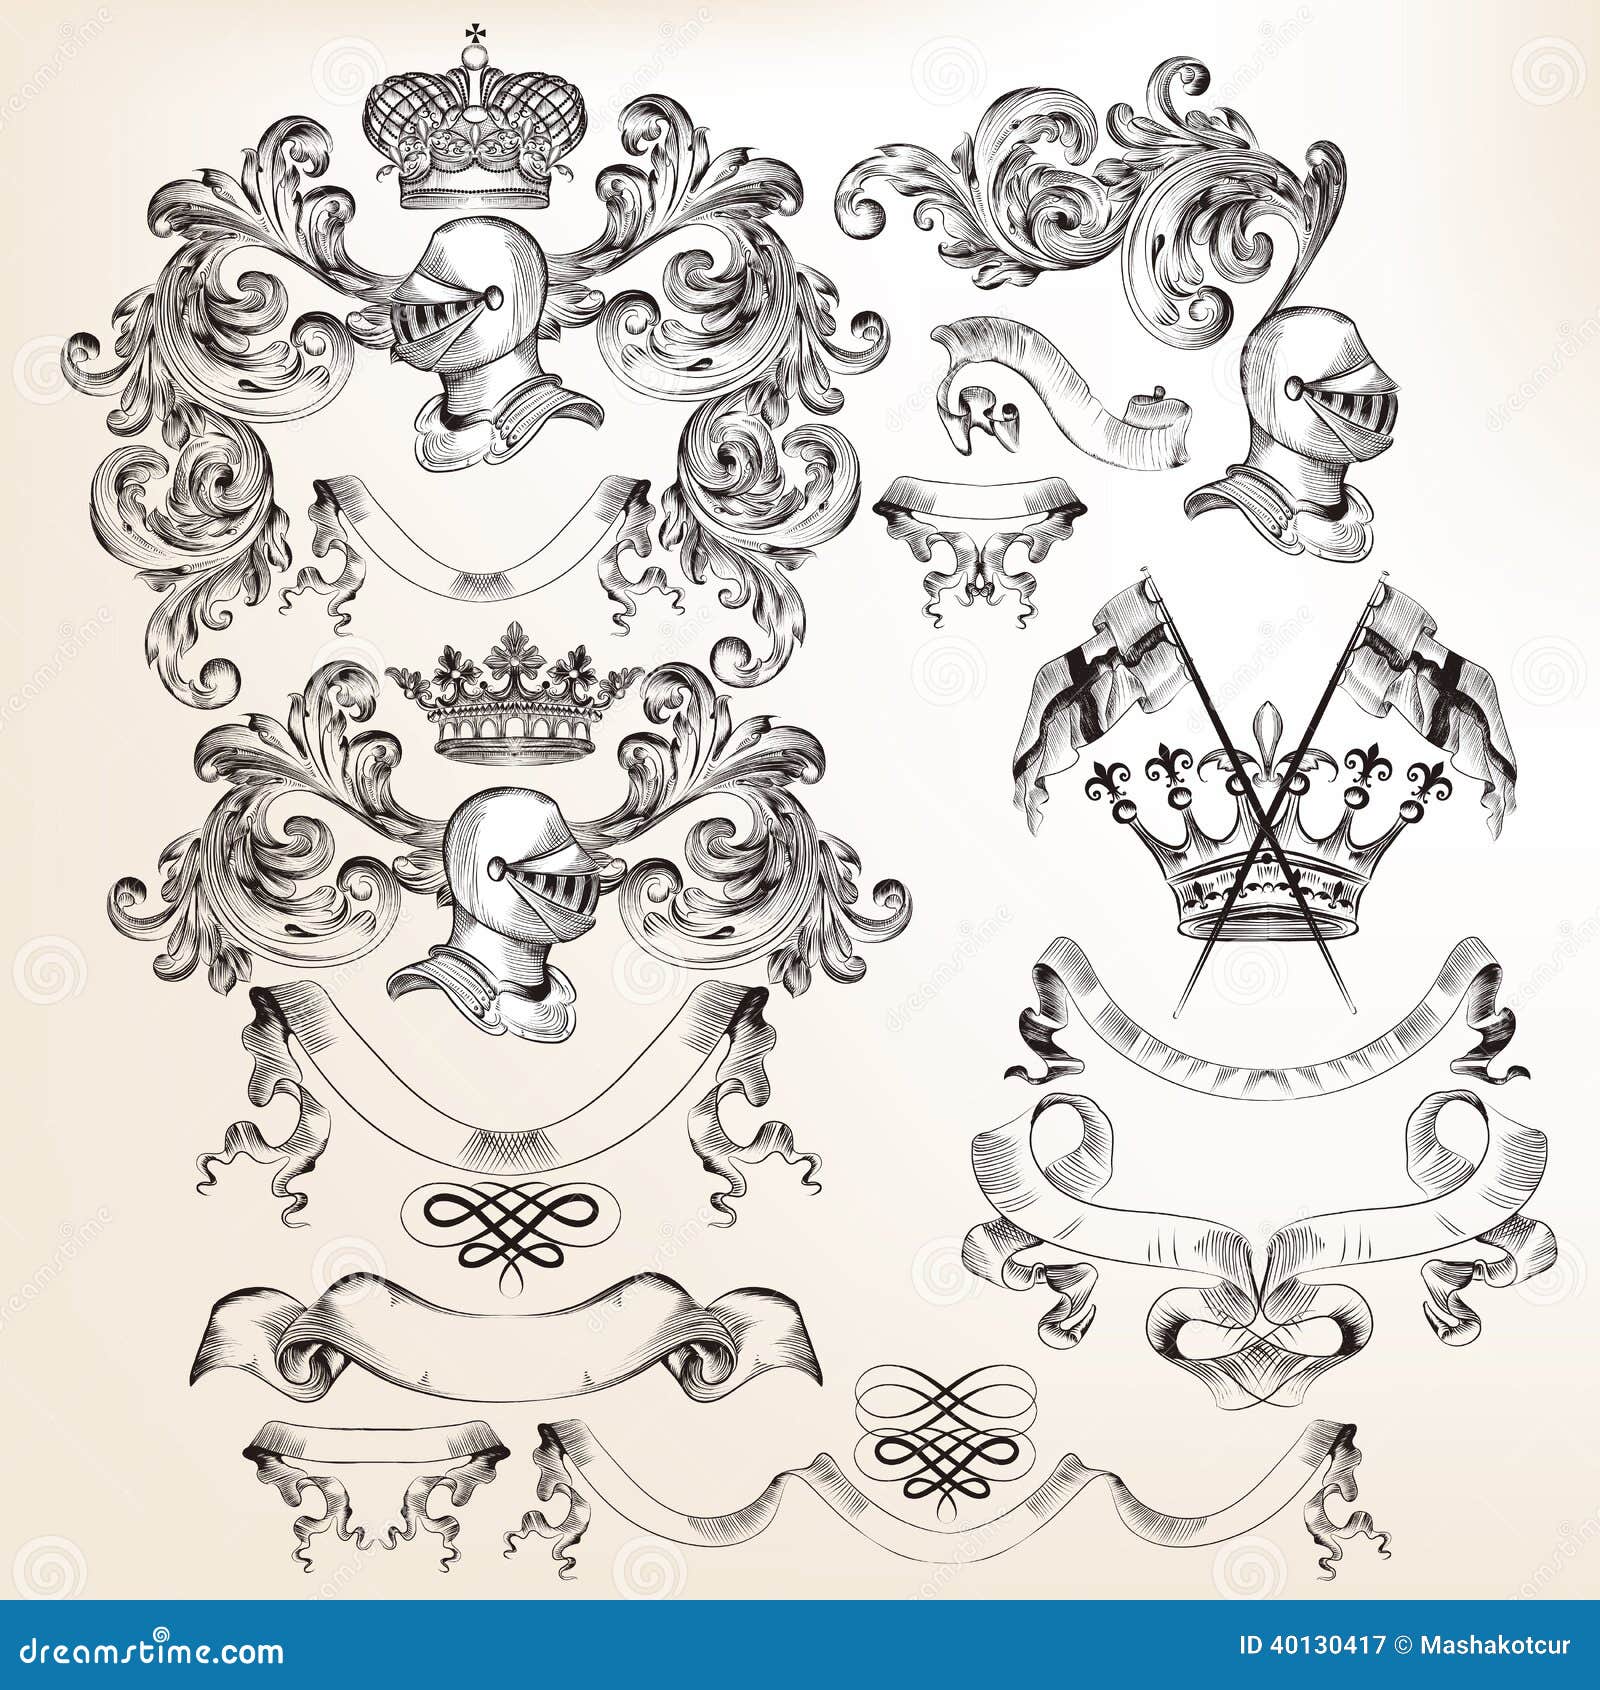 heraldic clipart collection - photo #25